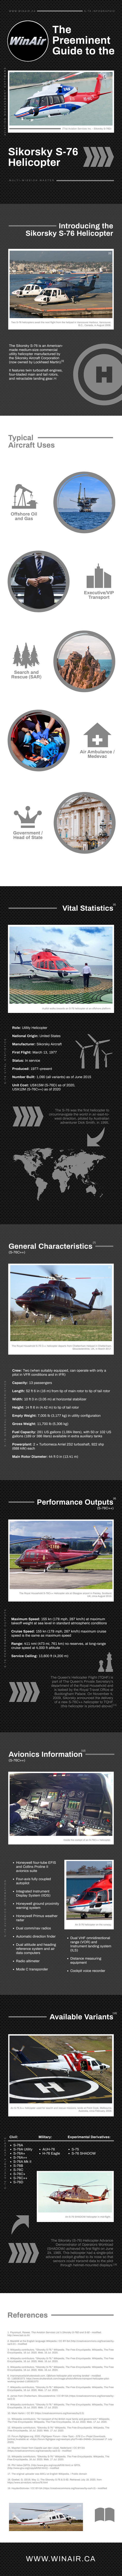 The Preeminent Guide to the Sikorsky S-76 Helicopter